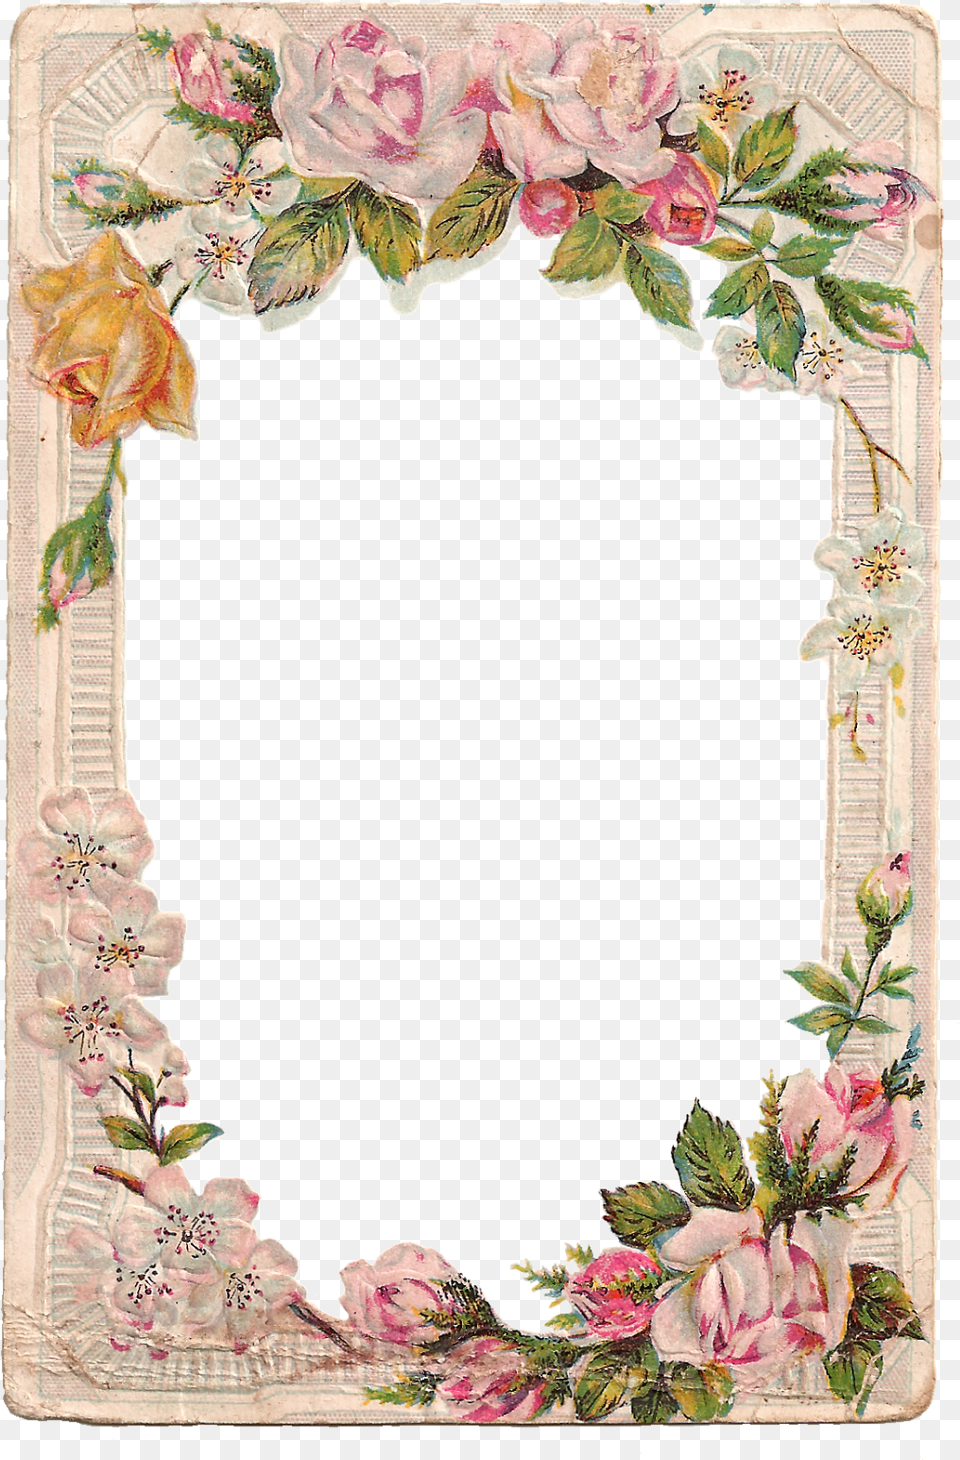 Help Your Garden Grow With These Simple Tips Flower Frame Flower Design Borders And Frames, Art, Floral Design, Graphics, Pattern Png